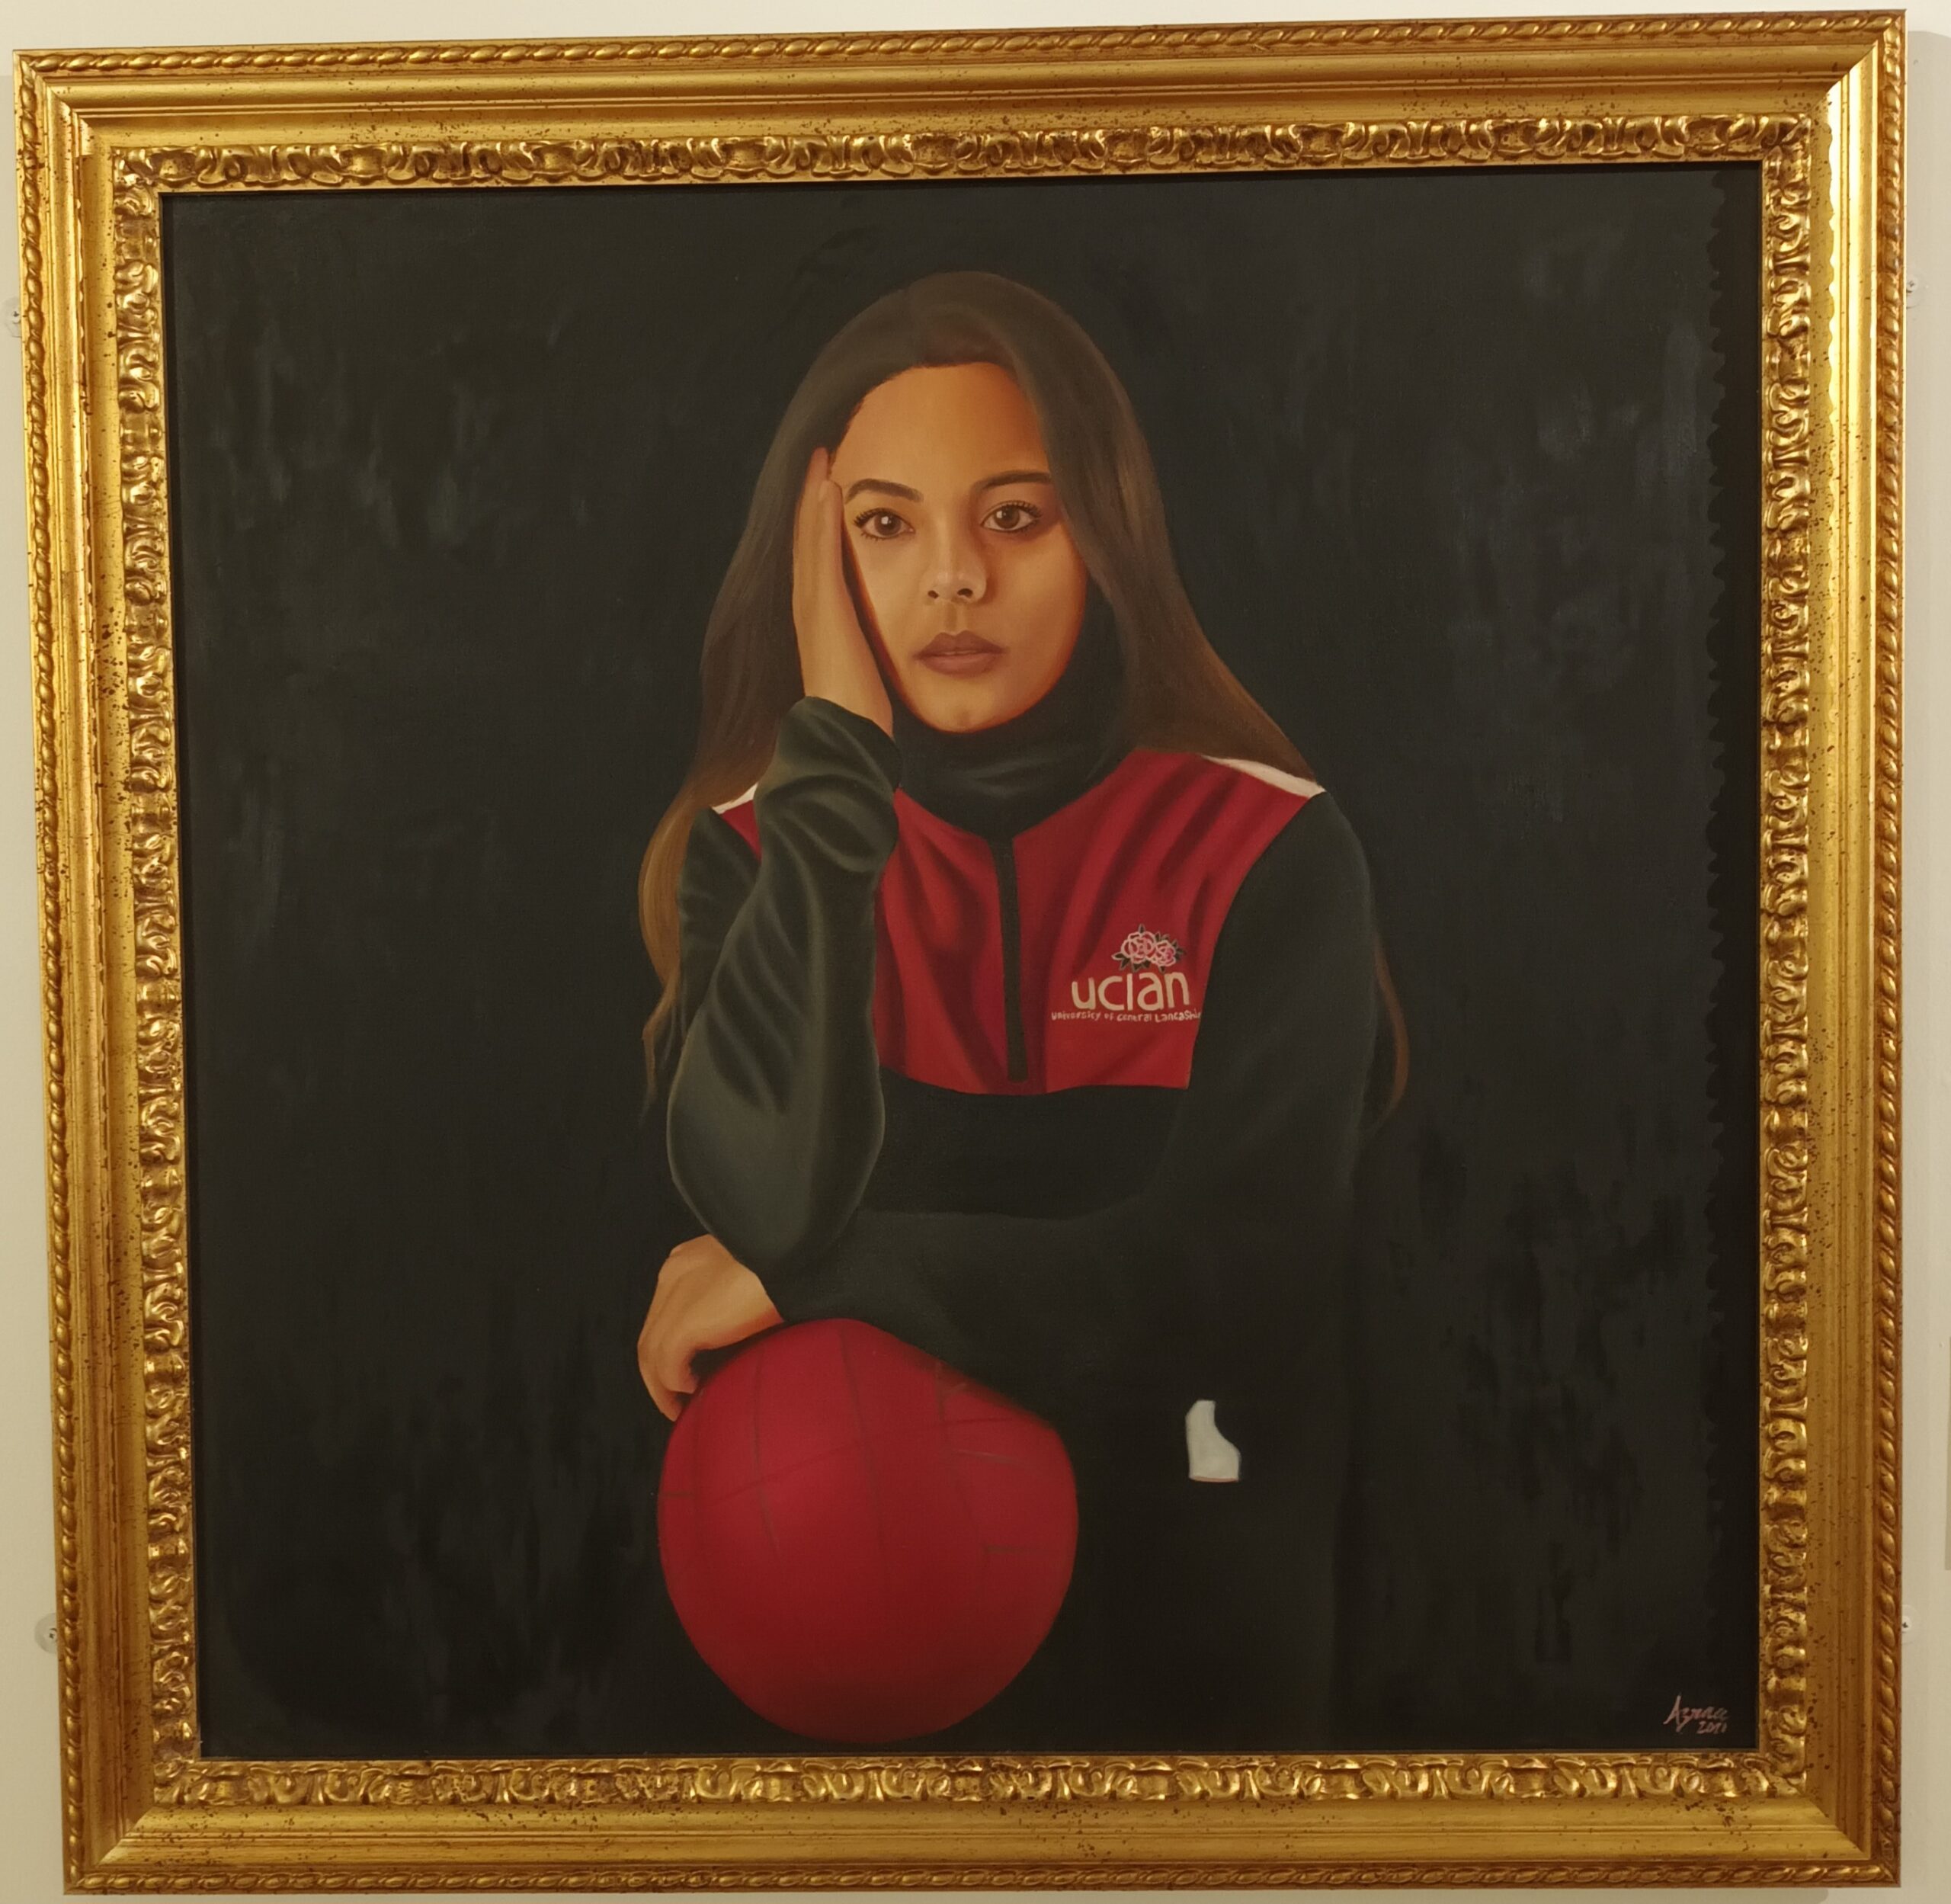 Image of a painting framed in gold of a person leaning on a ball wearing a UCLAN branded jacket.